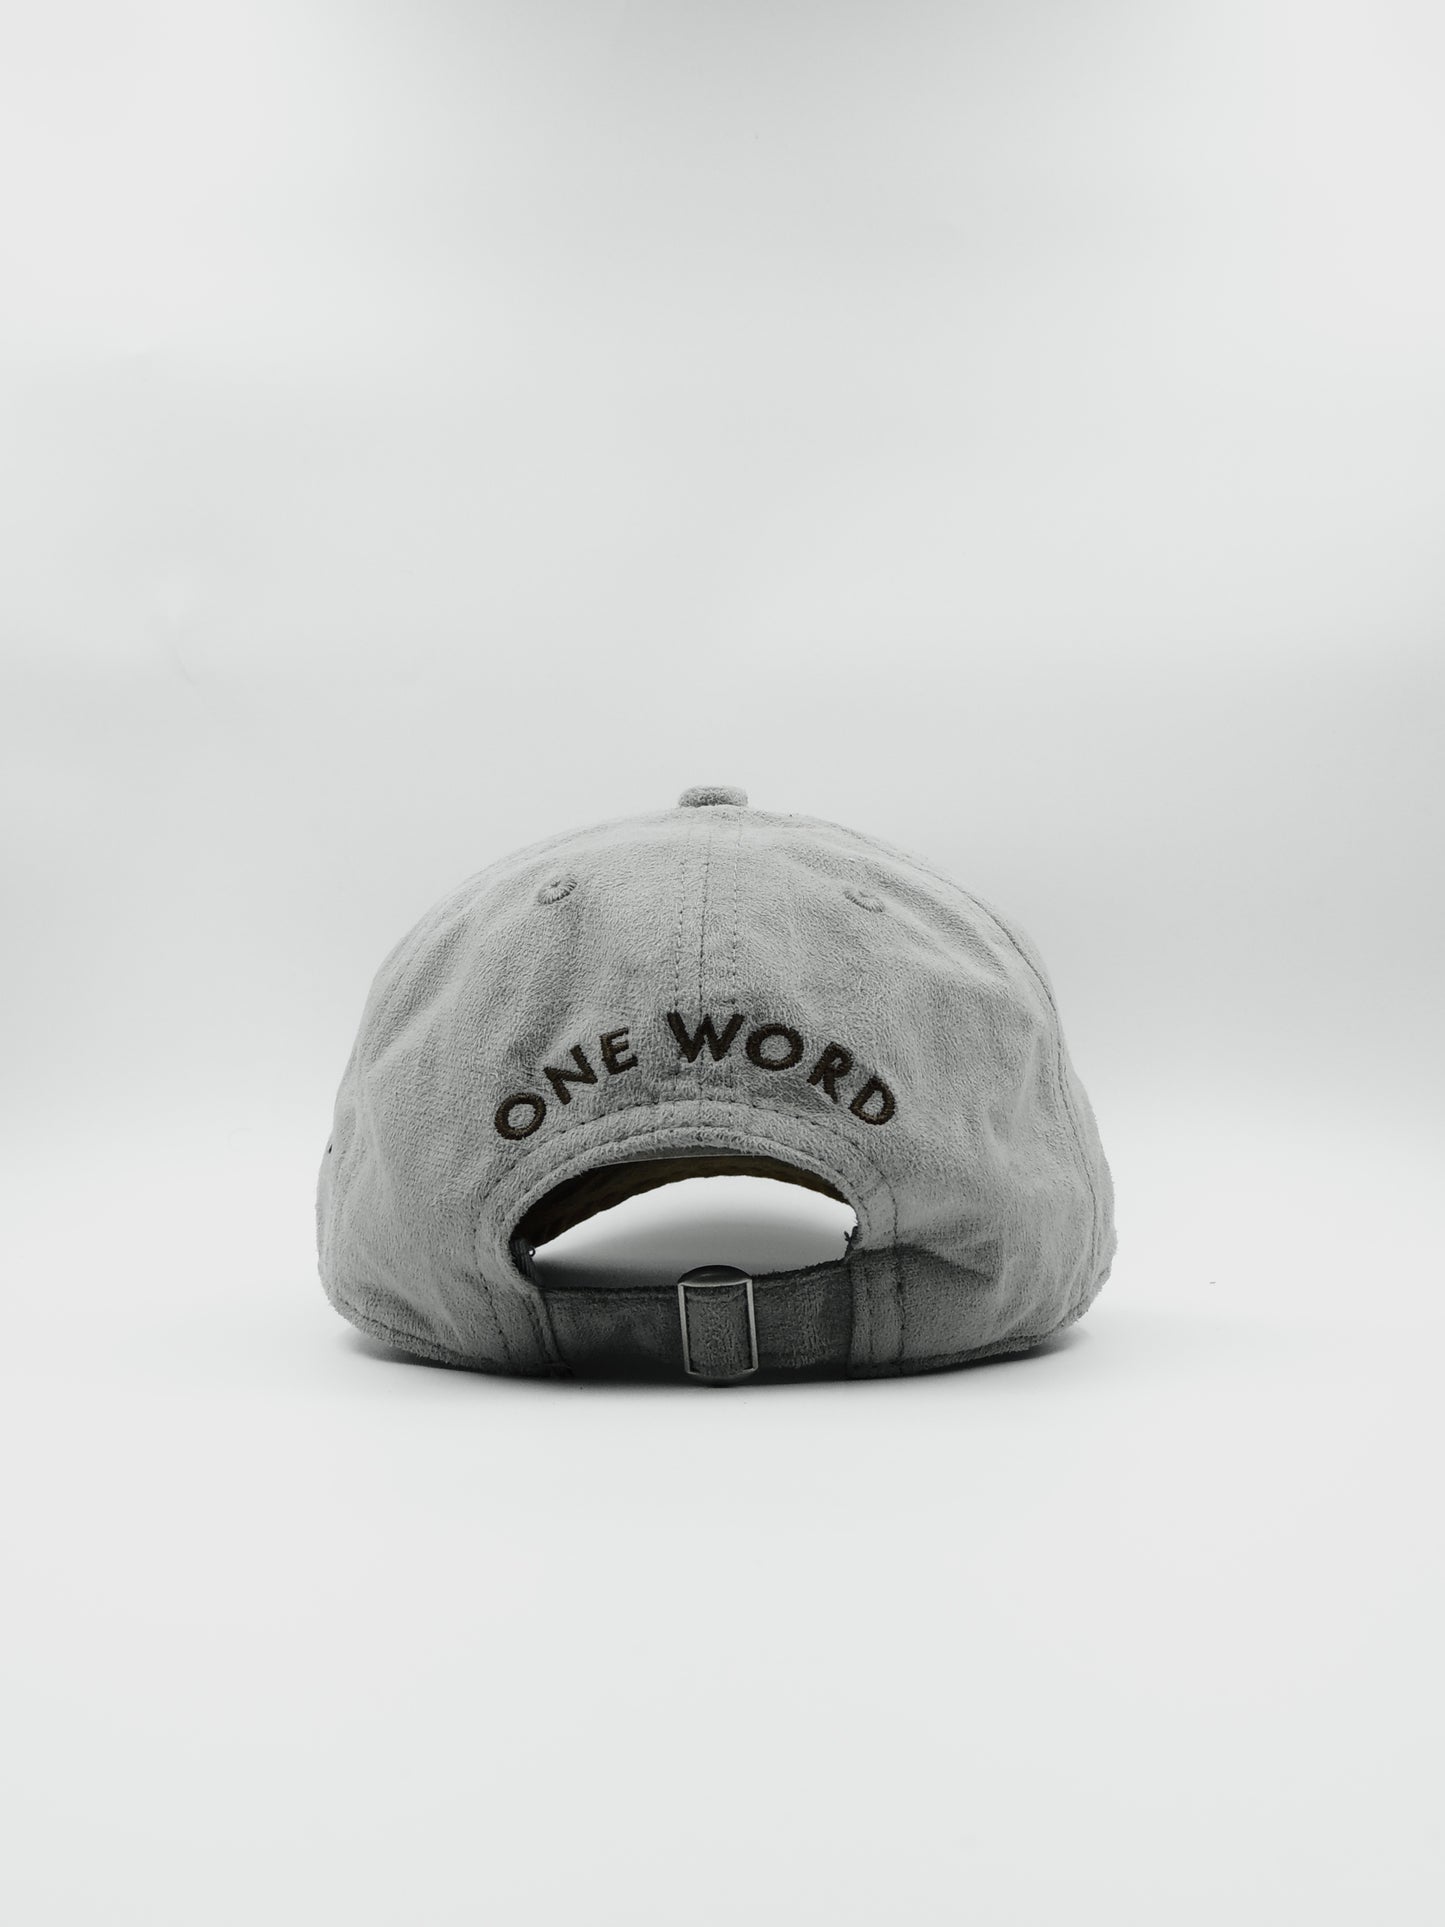 [keyword]-One Word StoreAgainst All Odds - Suede Hat